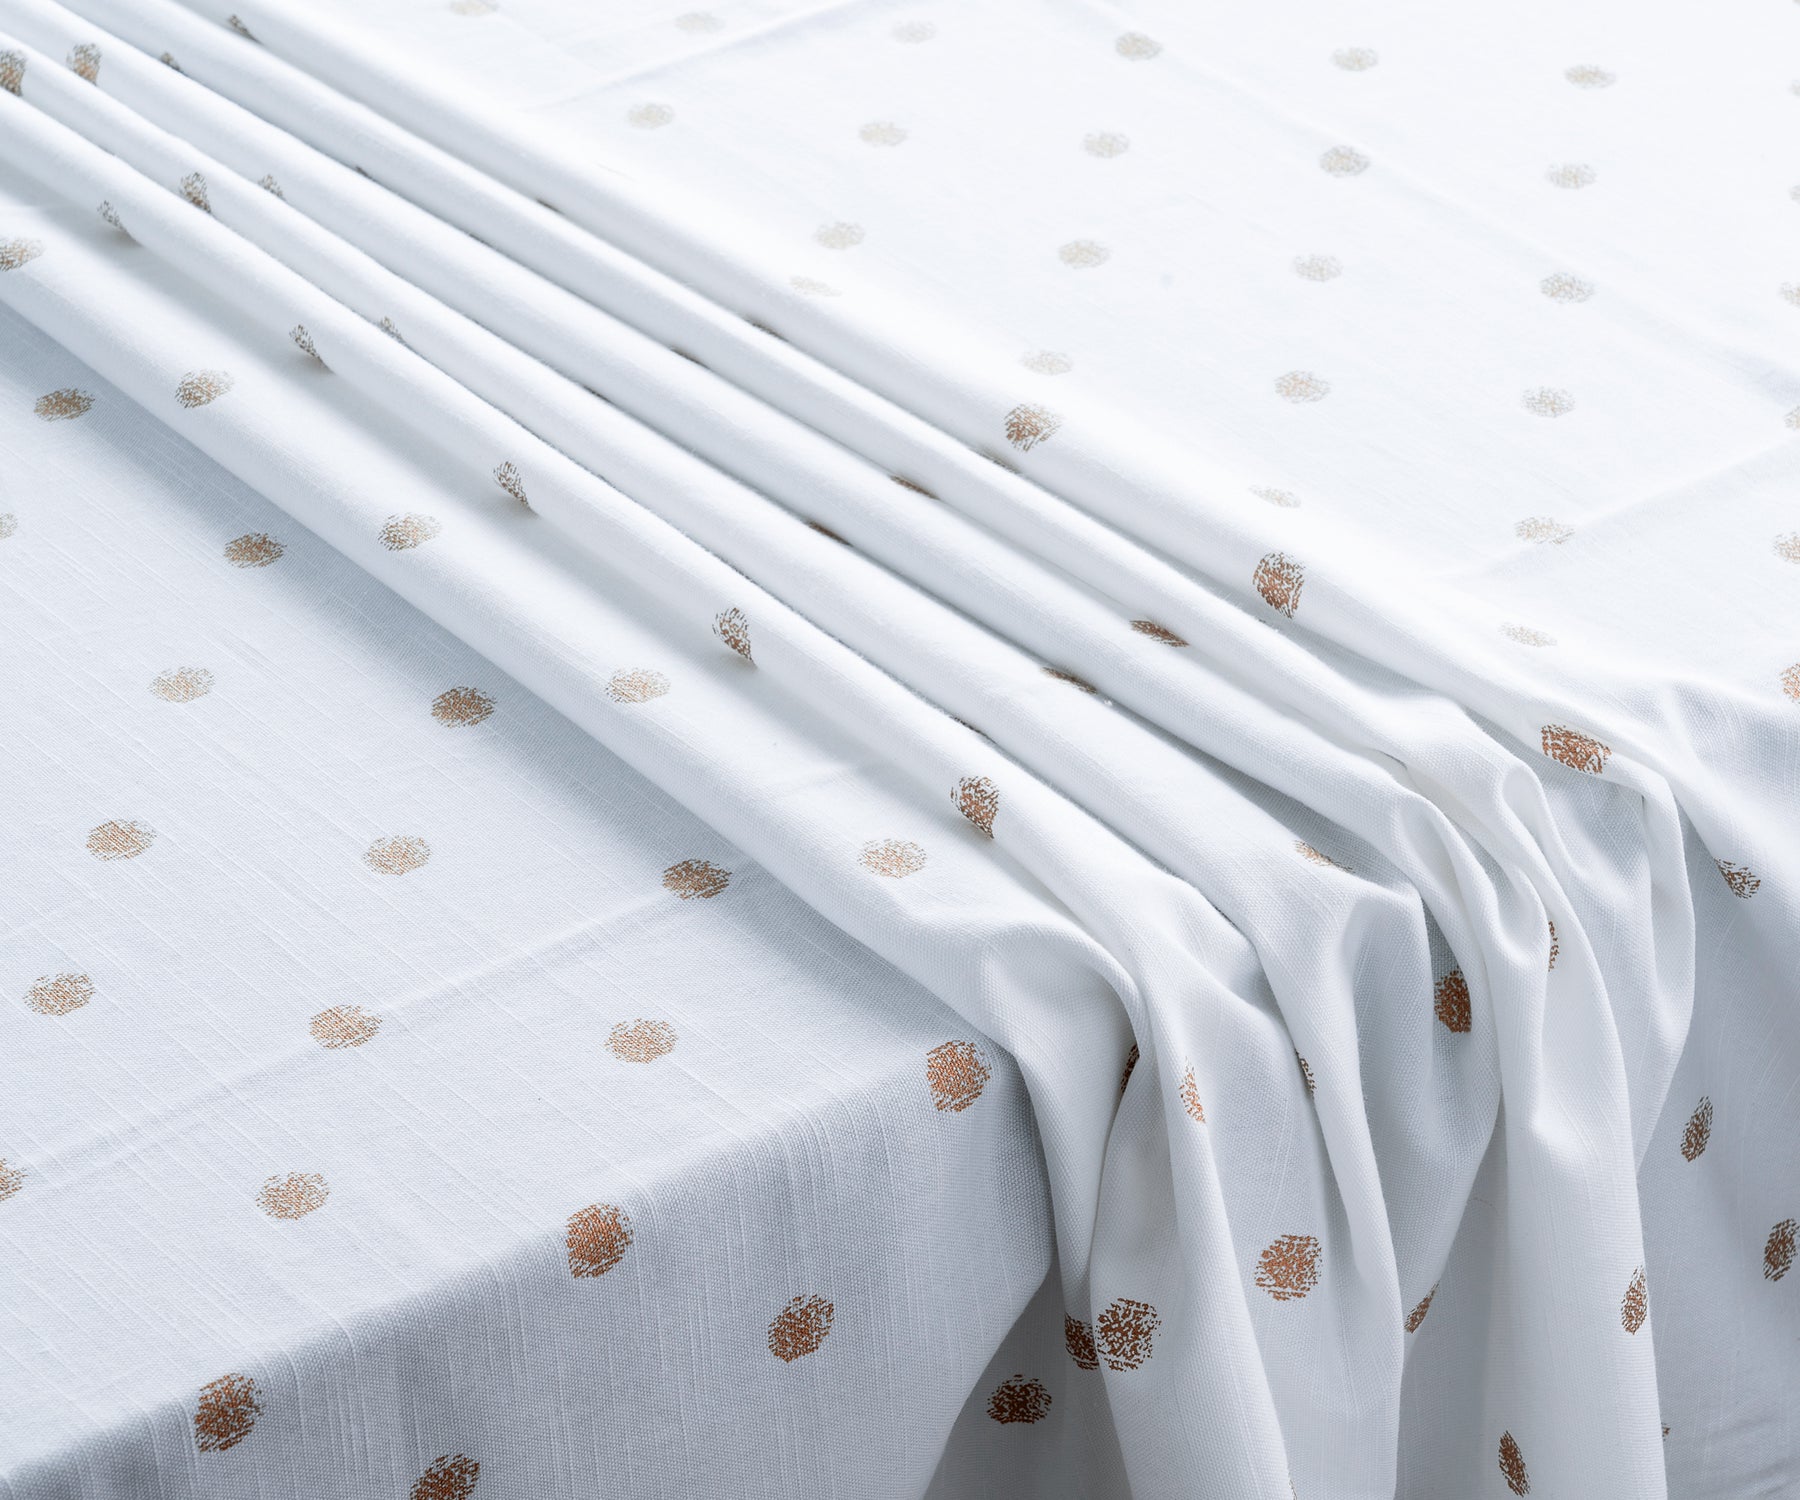 Upgrade your spring events with the elegance of bulk gold rectangle tablecloths, adding sophistication to your table settings.Versatile rectangular tablecloth, a must-have for any homemakerCrisp white round tablecloths for circular dining tables